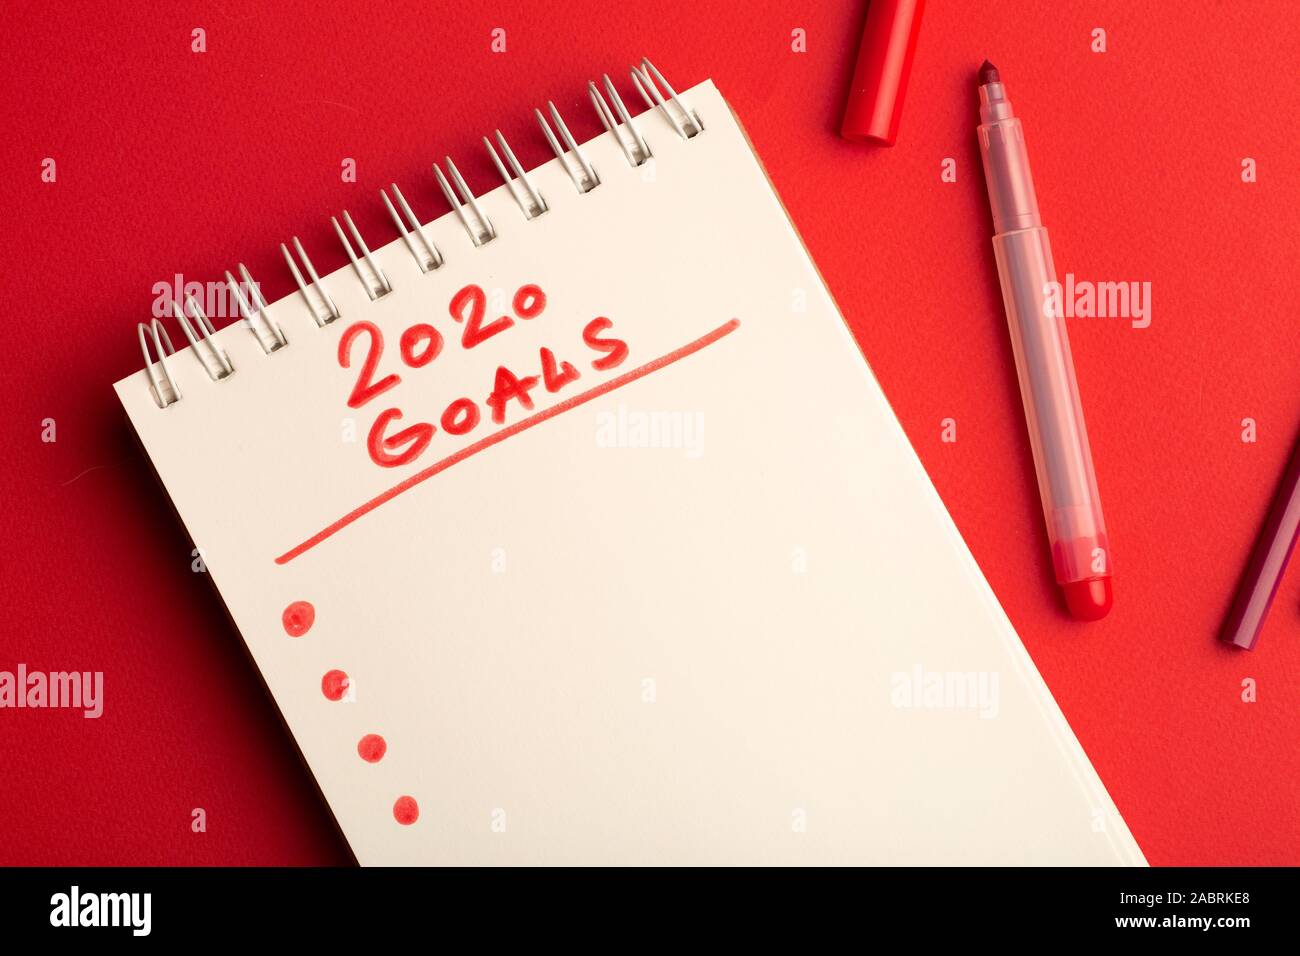 Goals Creative Inscription Goals Written In White Snowflakes On A Red Background For Design New Year Concept Stock Photo Alamy